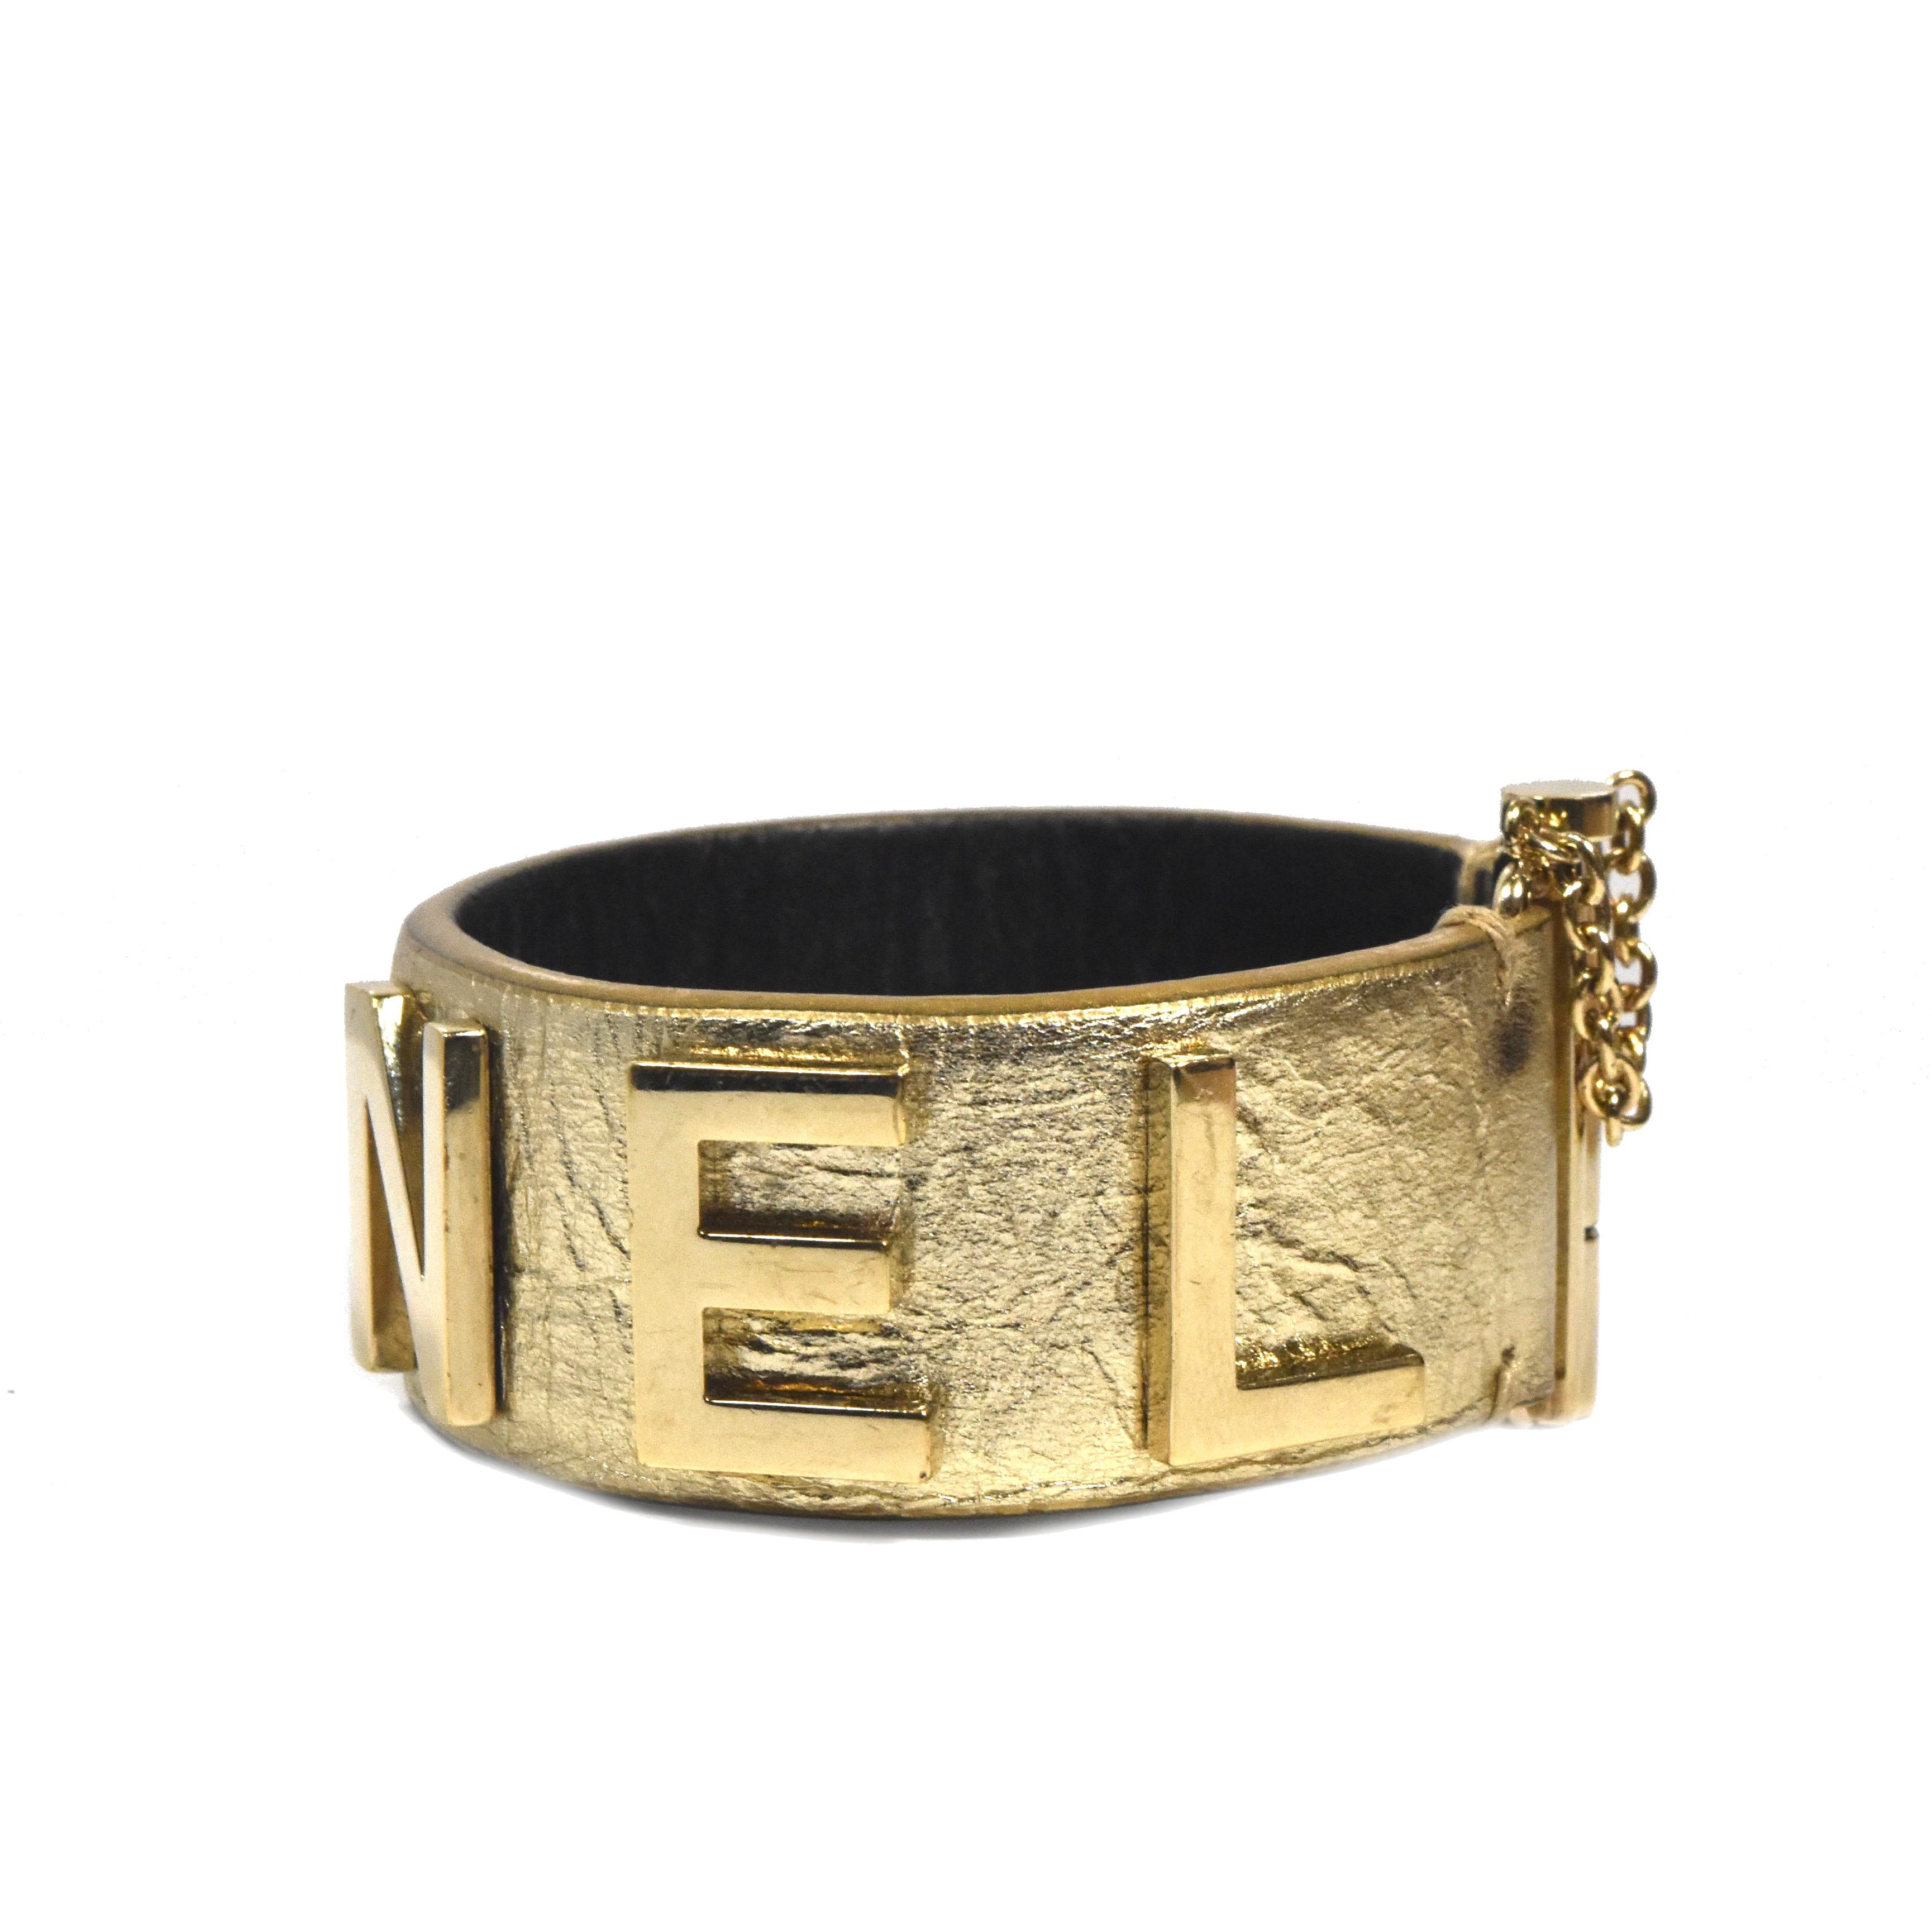 Bold look for this gold calfskin leather bracelet accented by large gold hardware Chanel logo and a slide lock closure. Timeless piece in good condition.

Designer: CHANEL
Style: Logo Cuff
Material: Calfskin Leather 
Clasp: Slide lock
Year: Approx.